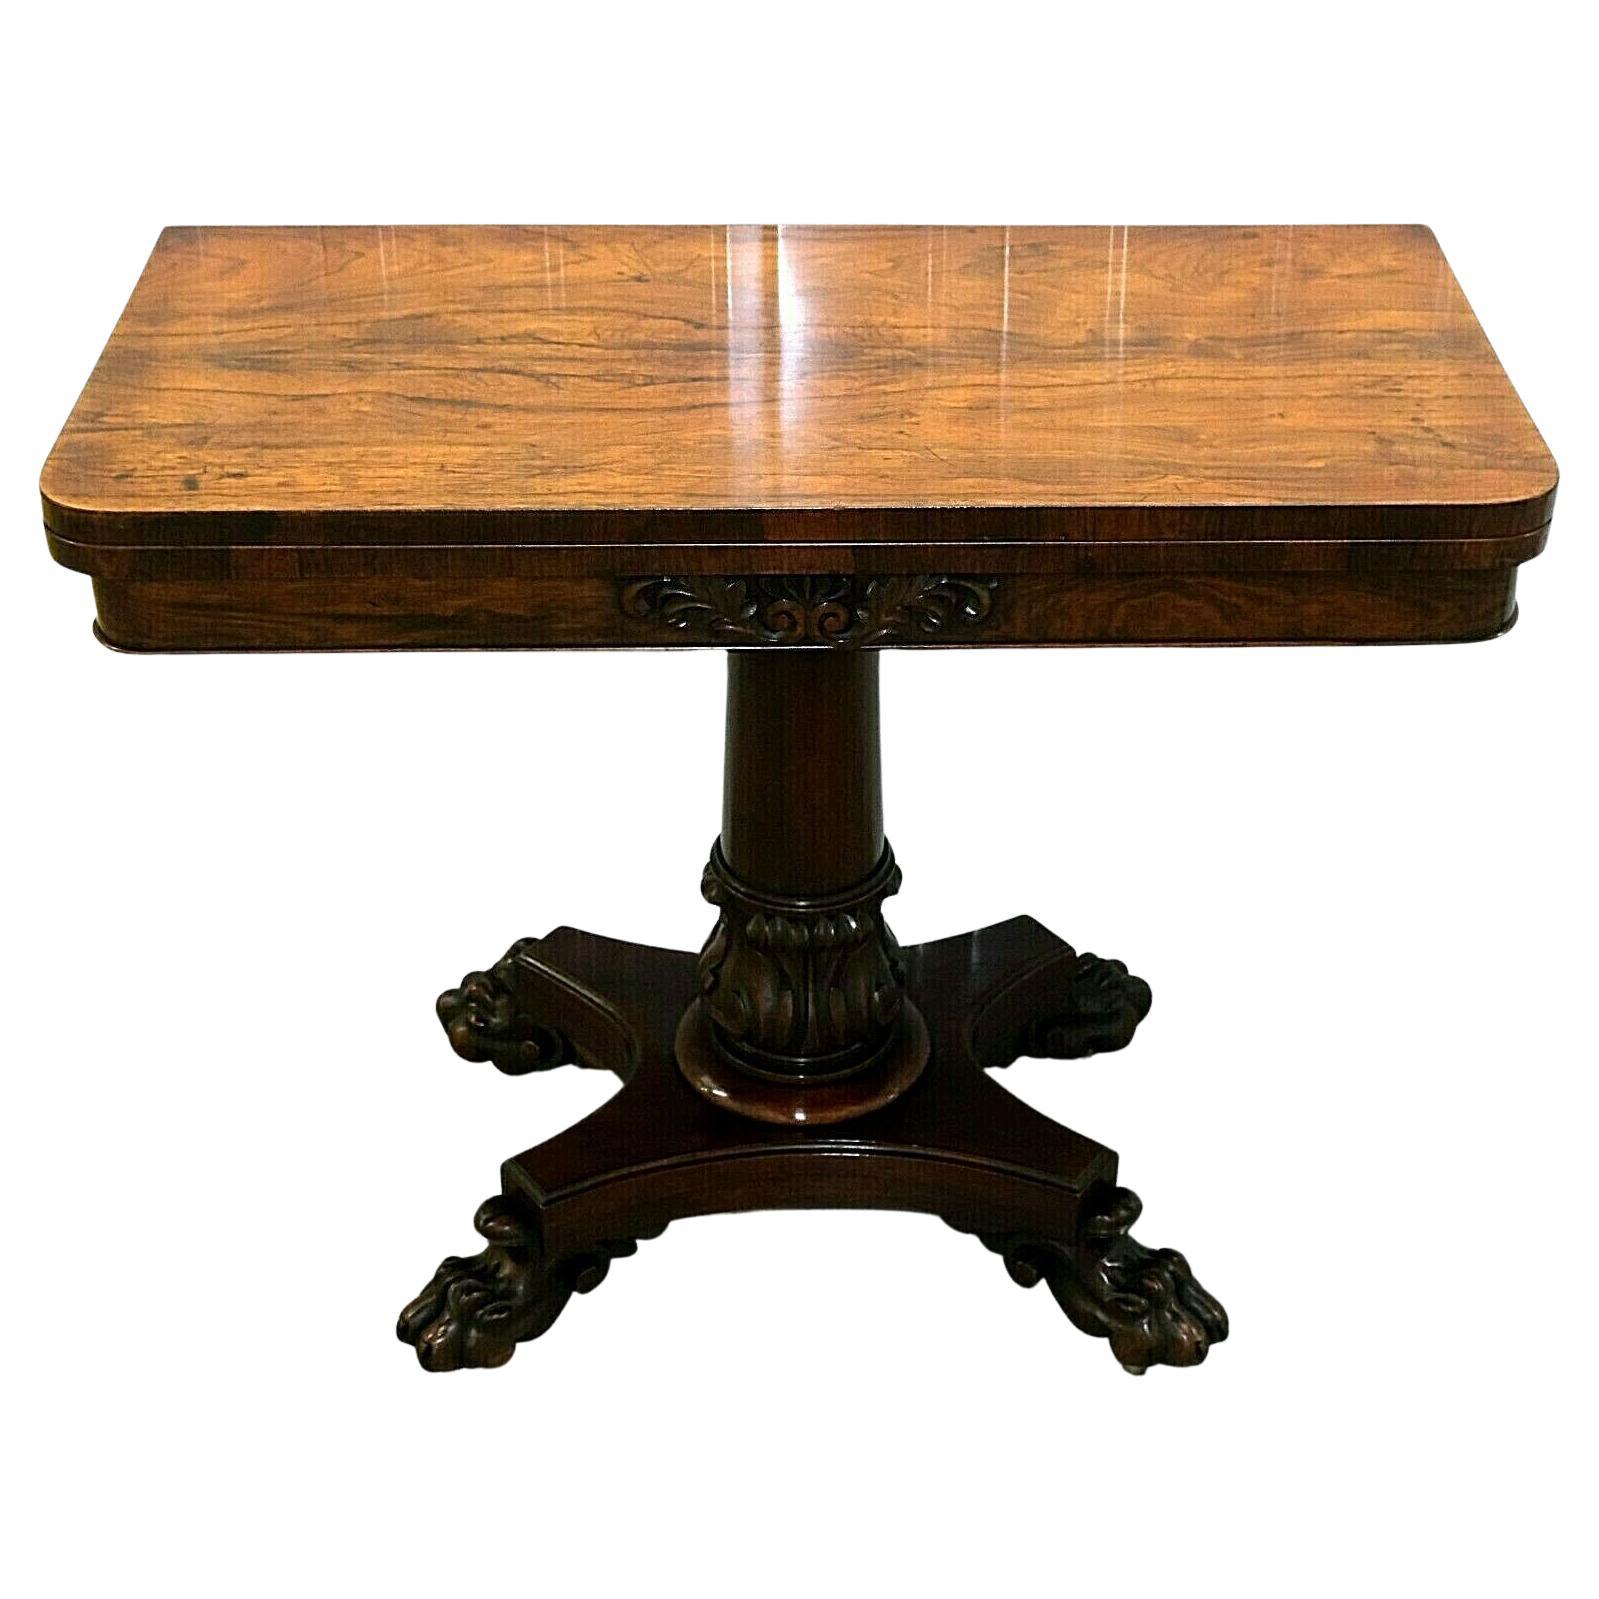 Regency Hardwood Turn over Top Card Table on Stunning Paw Feet & Casters For Sale